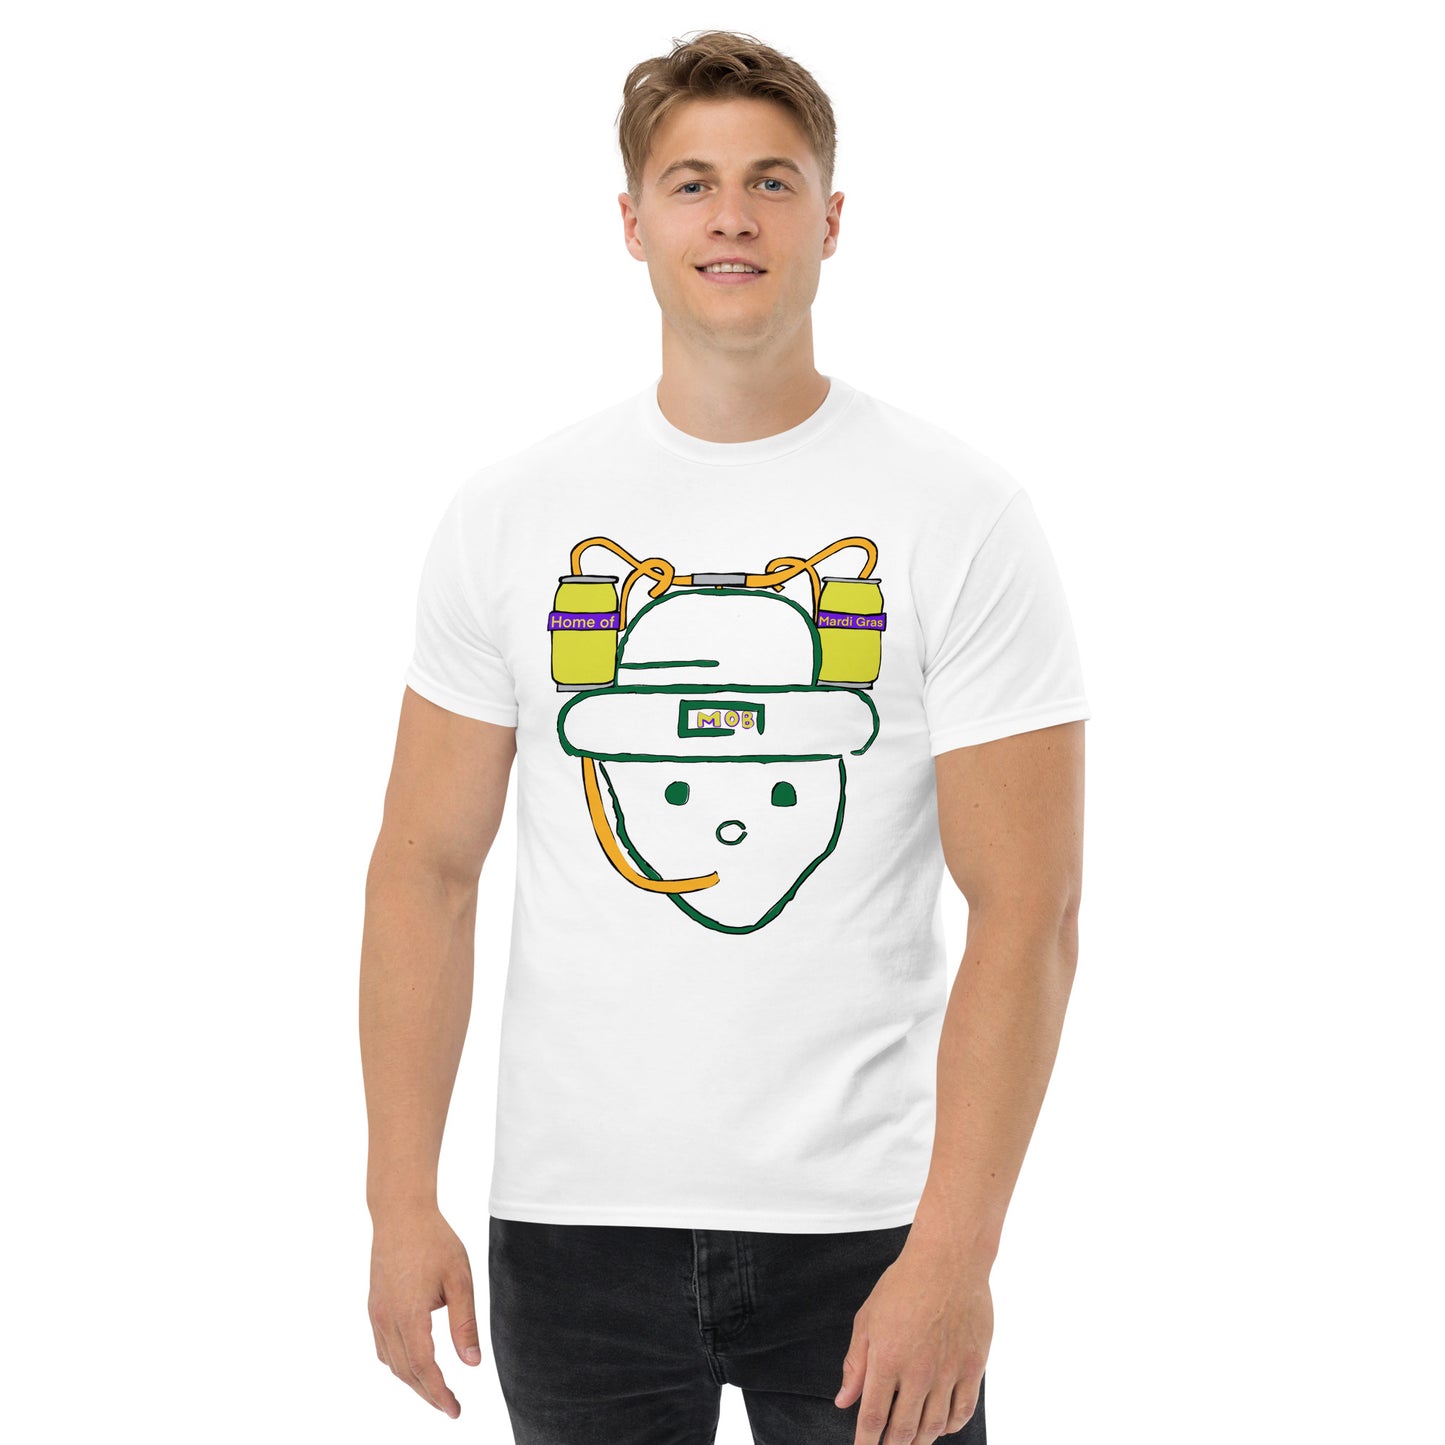 The Mobile Leprchan tee